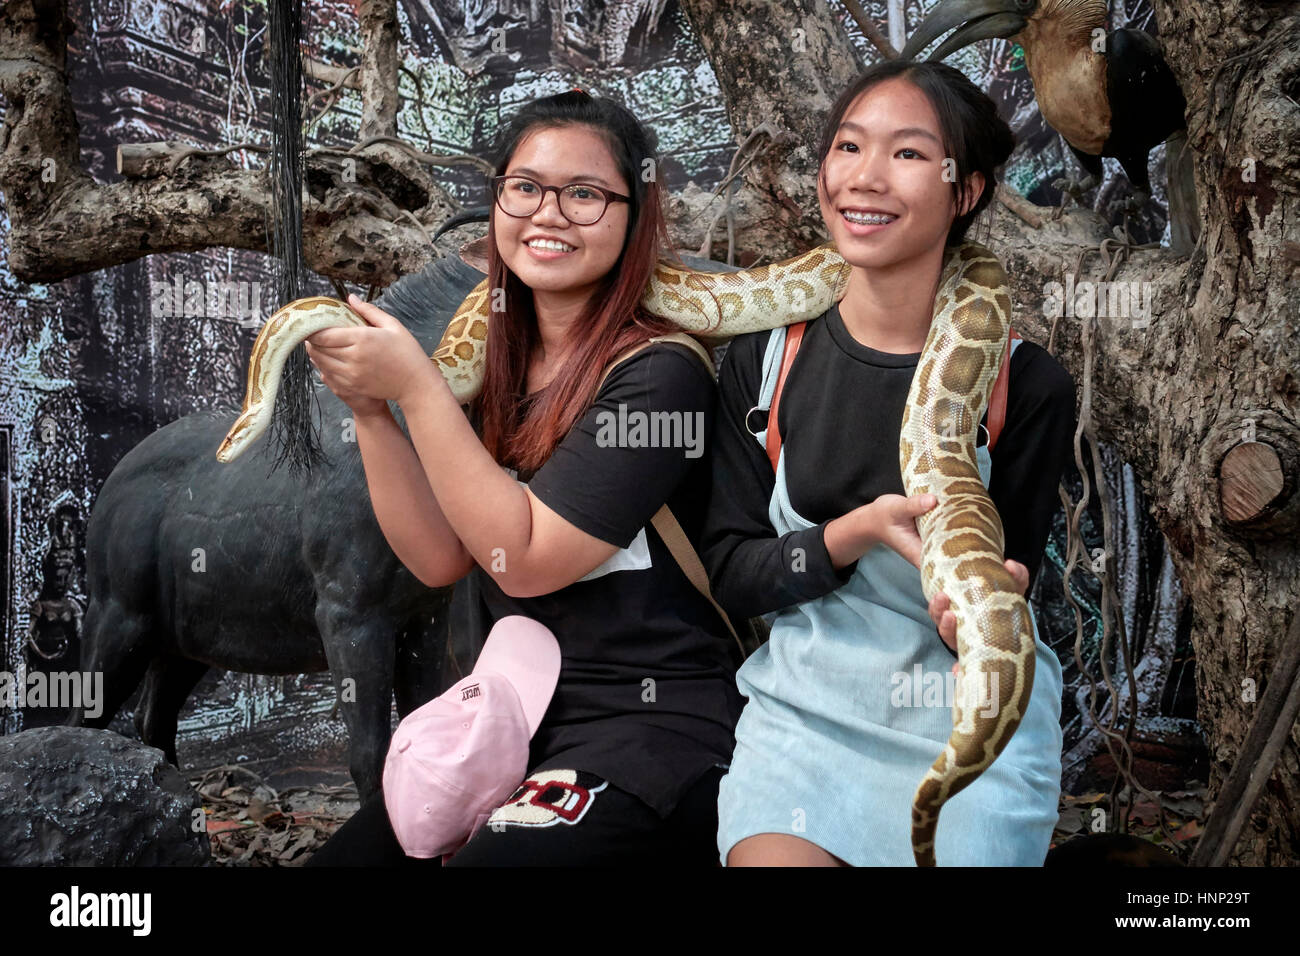 People interacting with wildlife. Two Thai girls handling a large Python snake at a local zoo. Thailand Southeast Asia Stock Photo